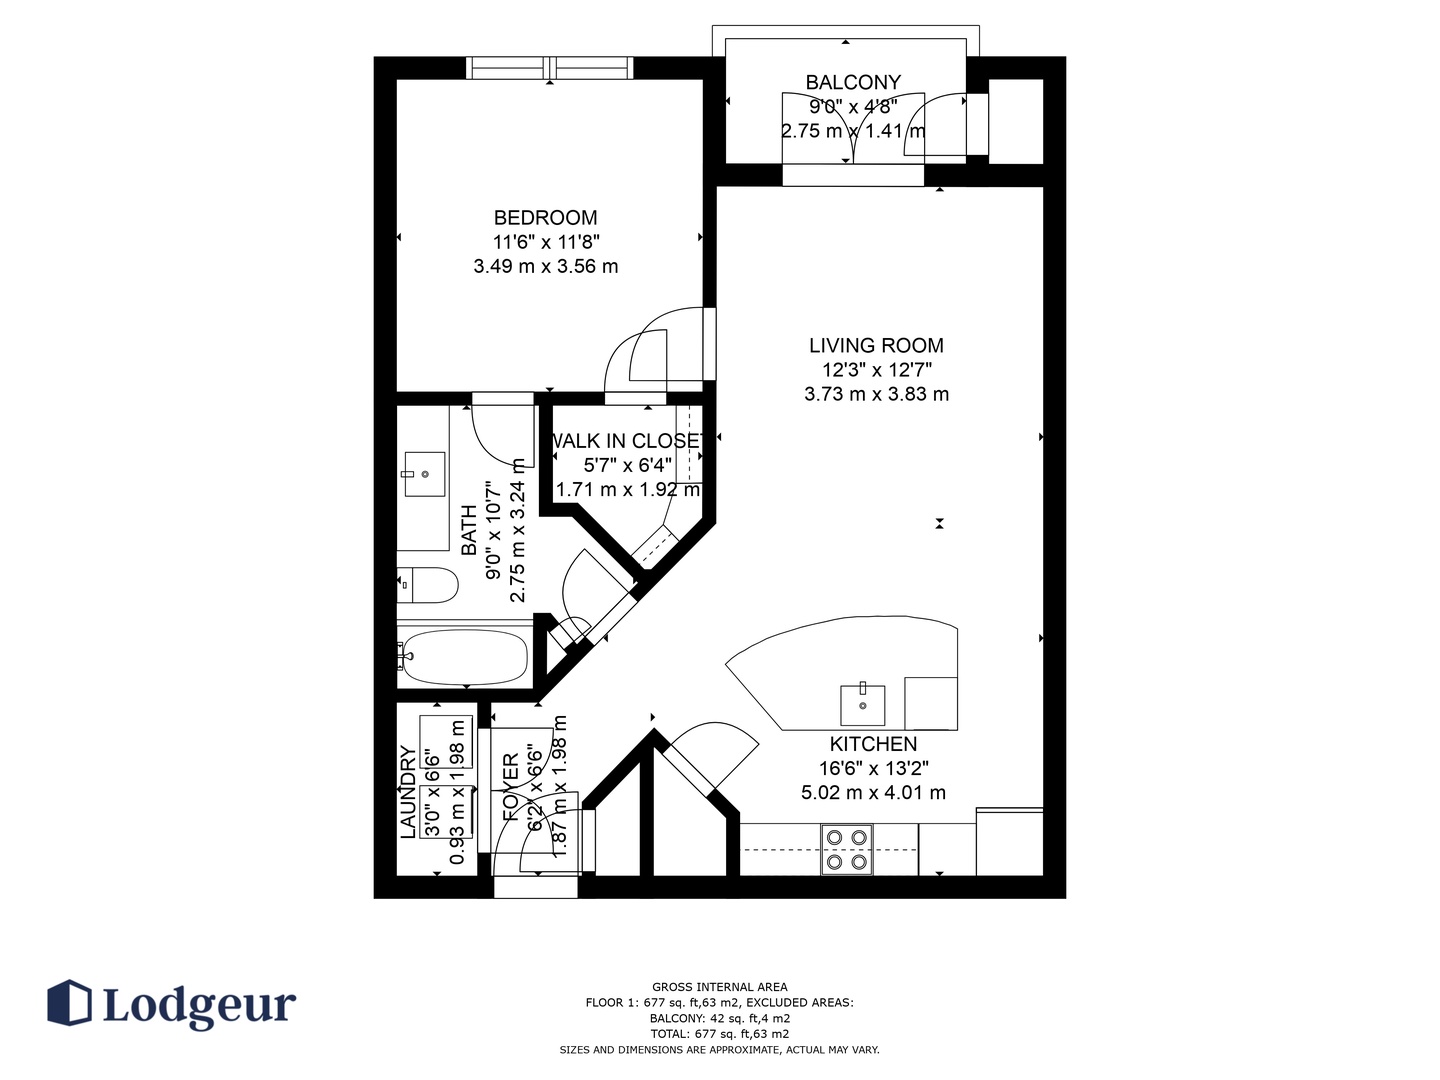 This open-concept floor plan provides a spacious and versatile living space.